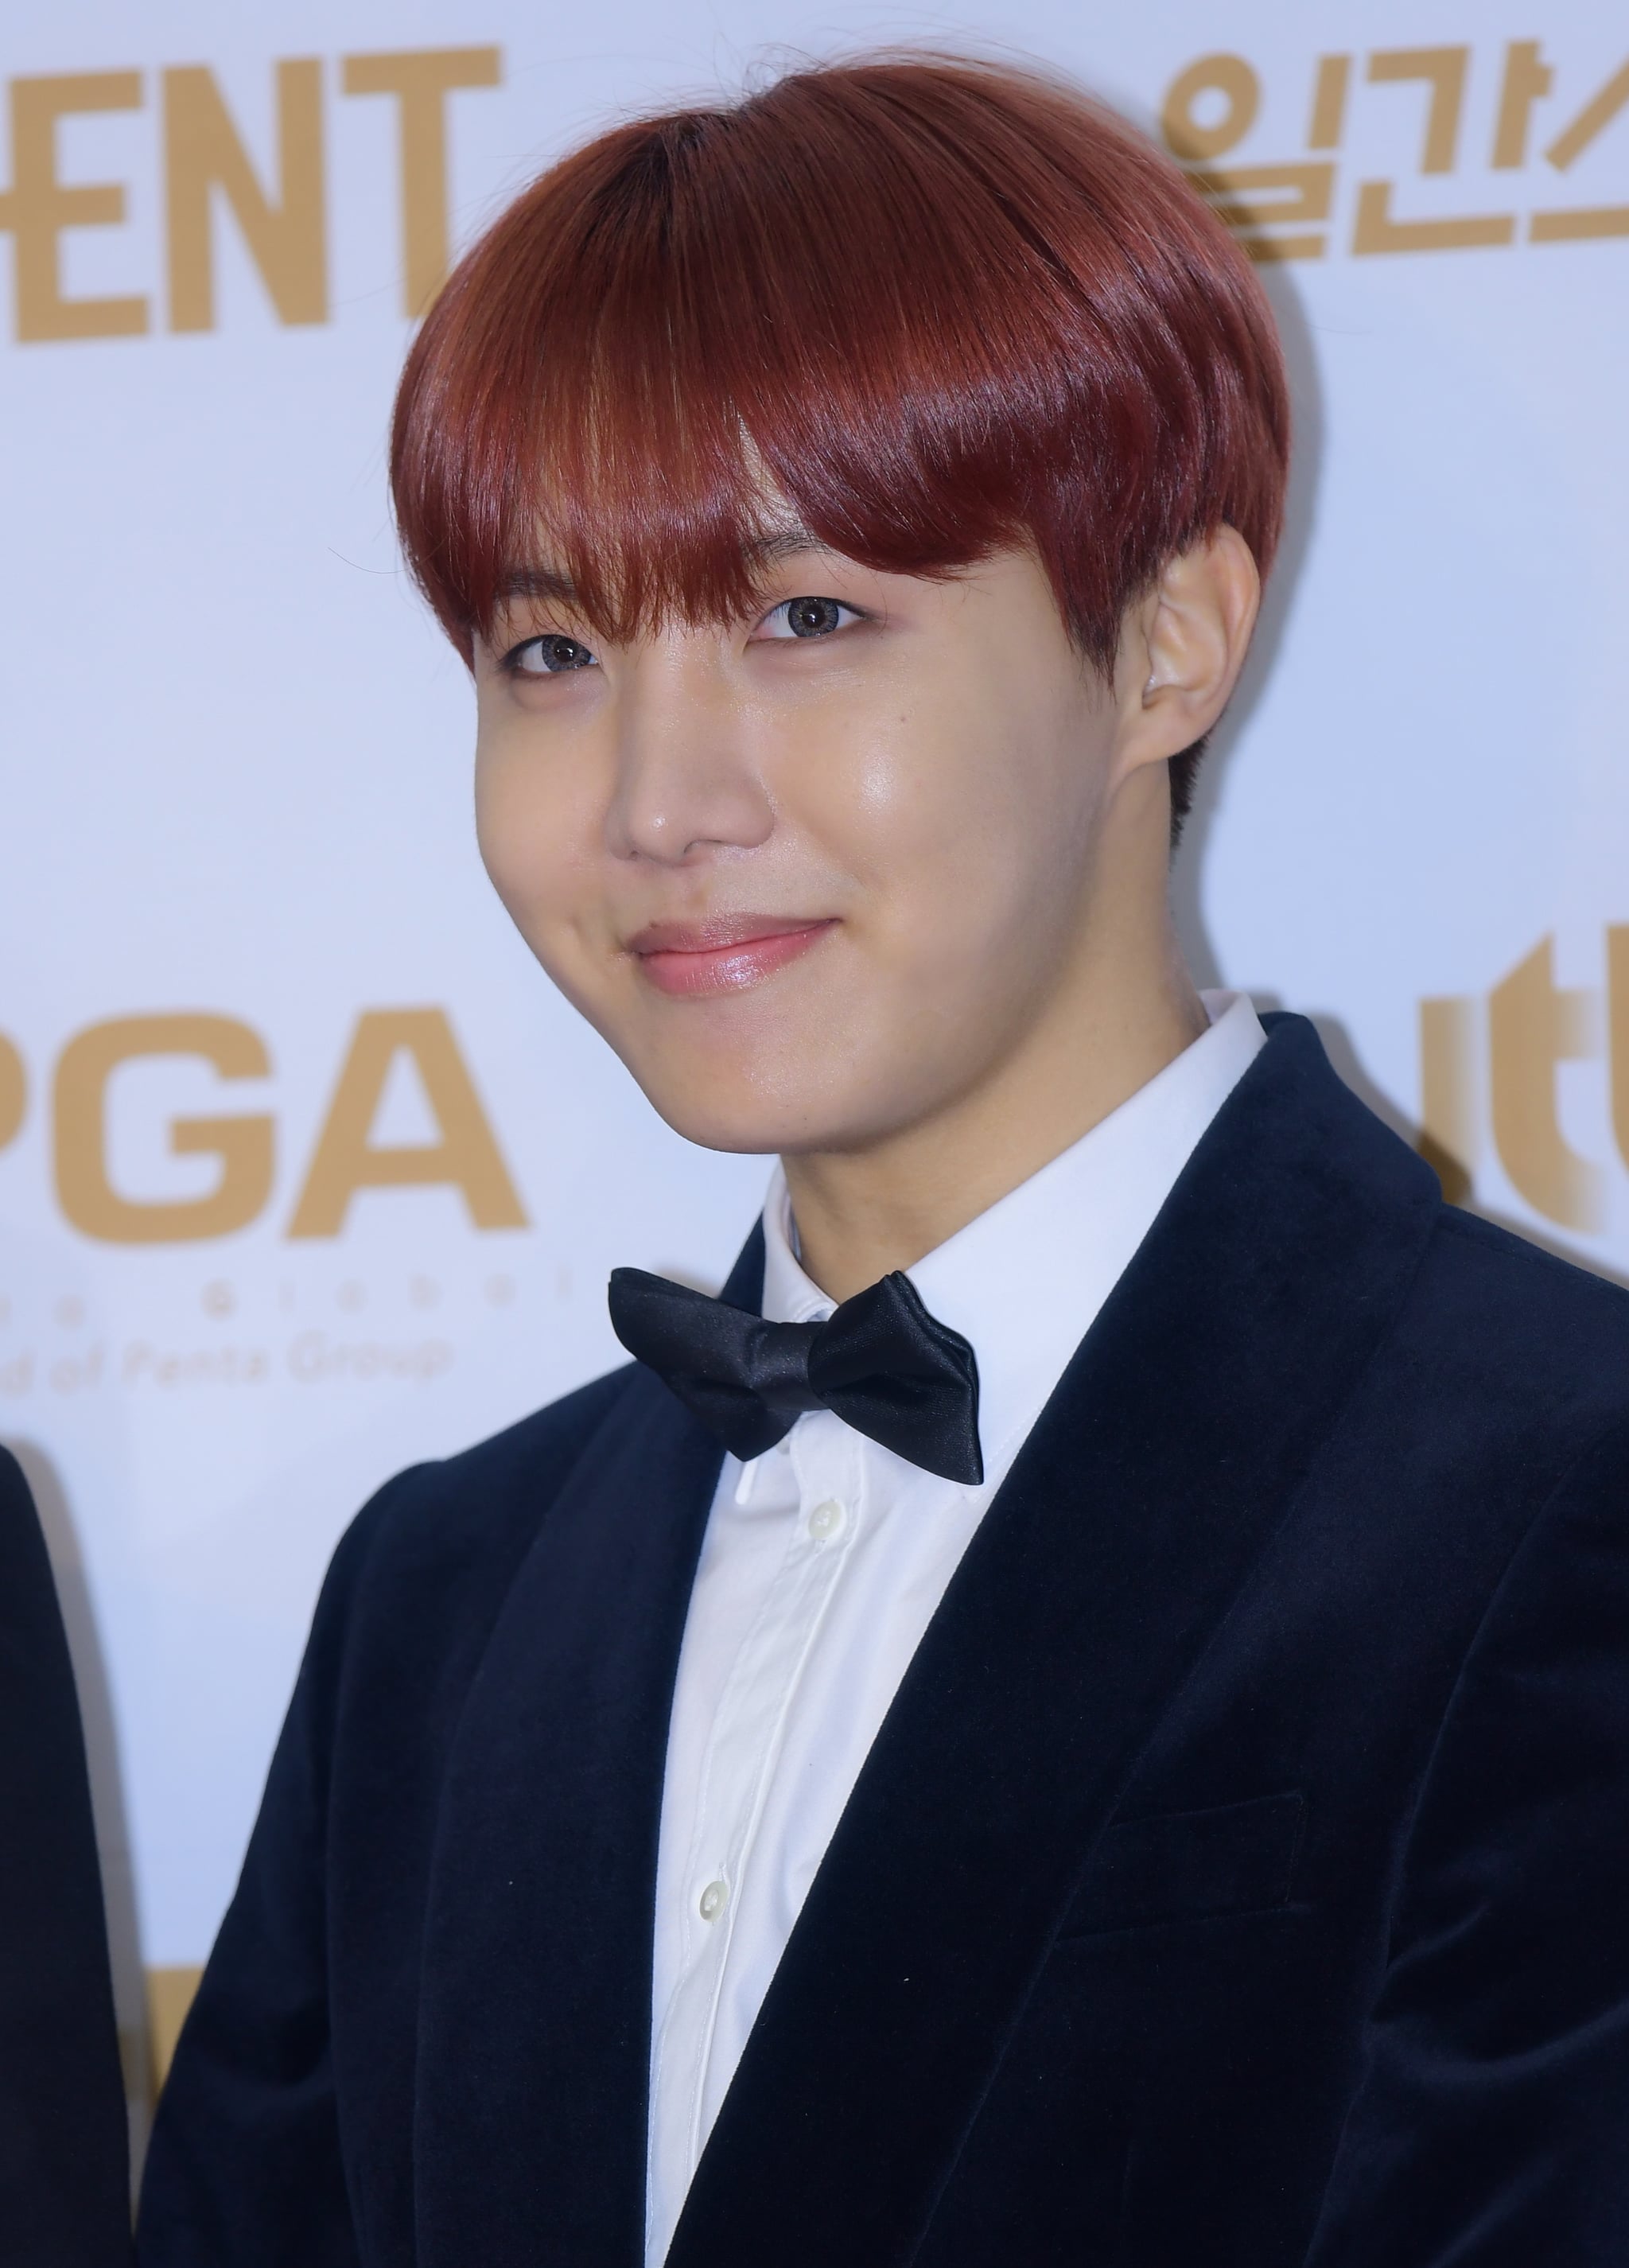 J-Hope's Red Hair Color 2018 | If You Ever Need Hair-Color Inspiration, Look No Further BTS | POPSUGAR Beauty Photo 15